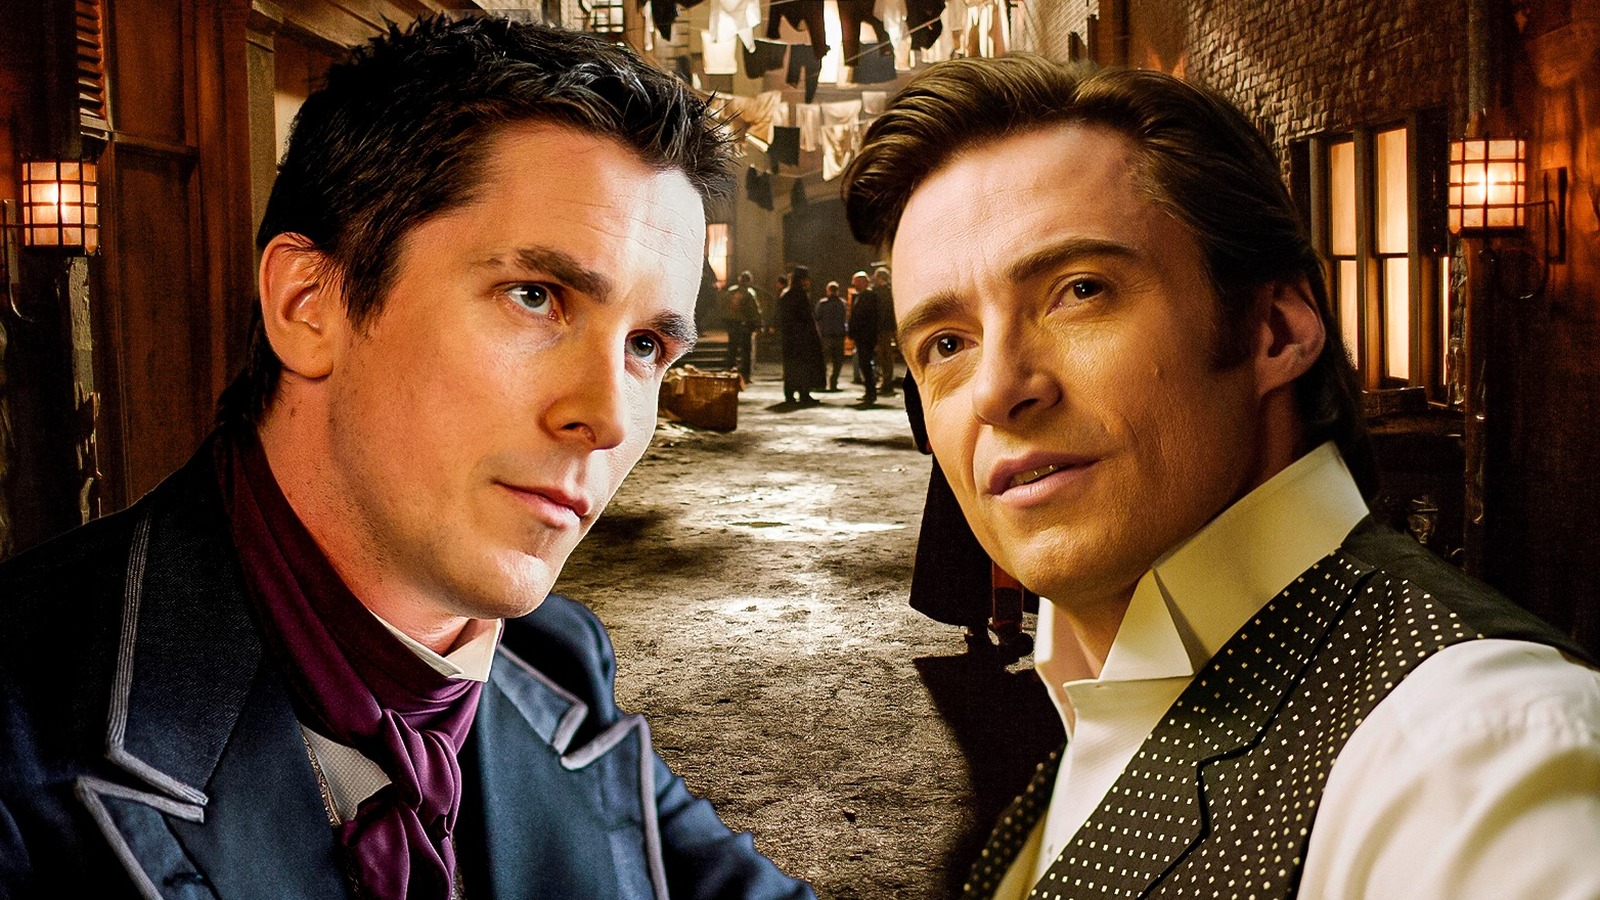 Christopher Nolan's The Prestige Looks at the Obsession Behind the